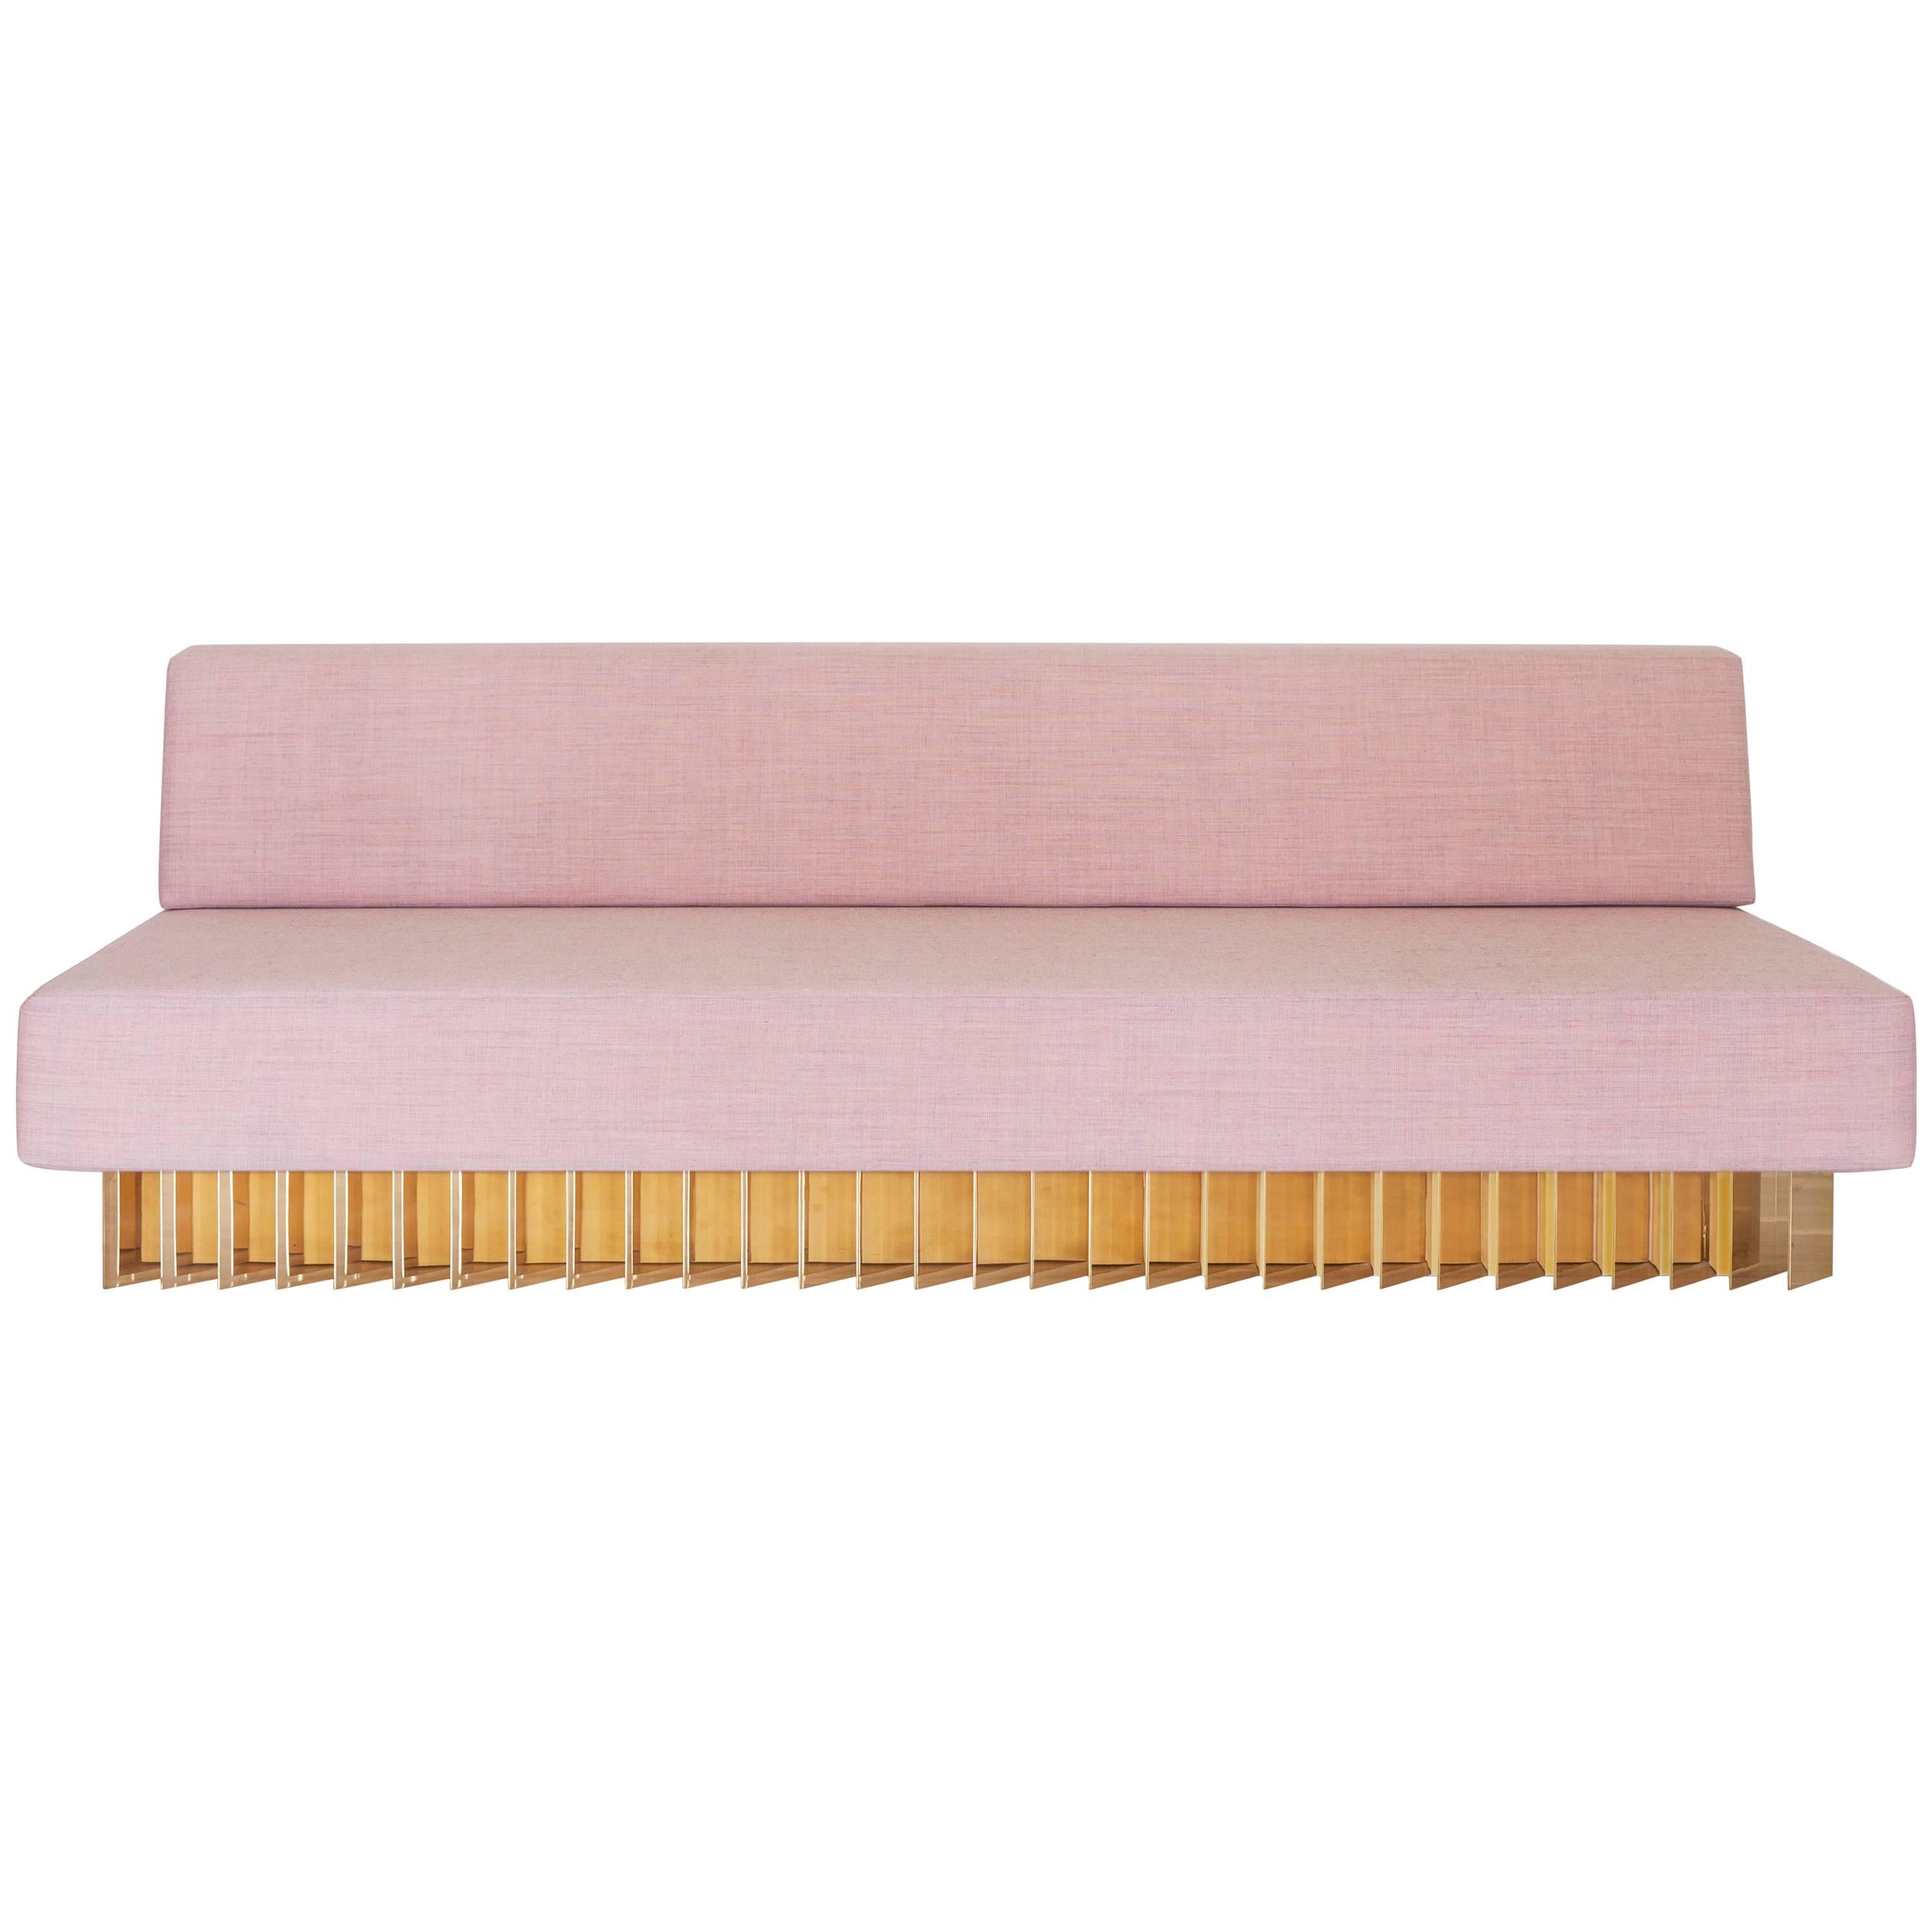 Angled Brass Bar Armless Sofa in Brass and Pink Kvadrat Upholstery  For Sale